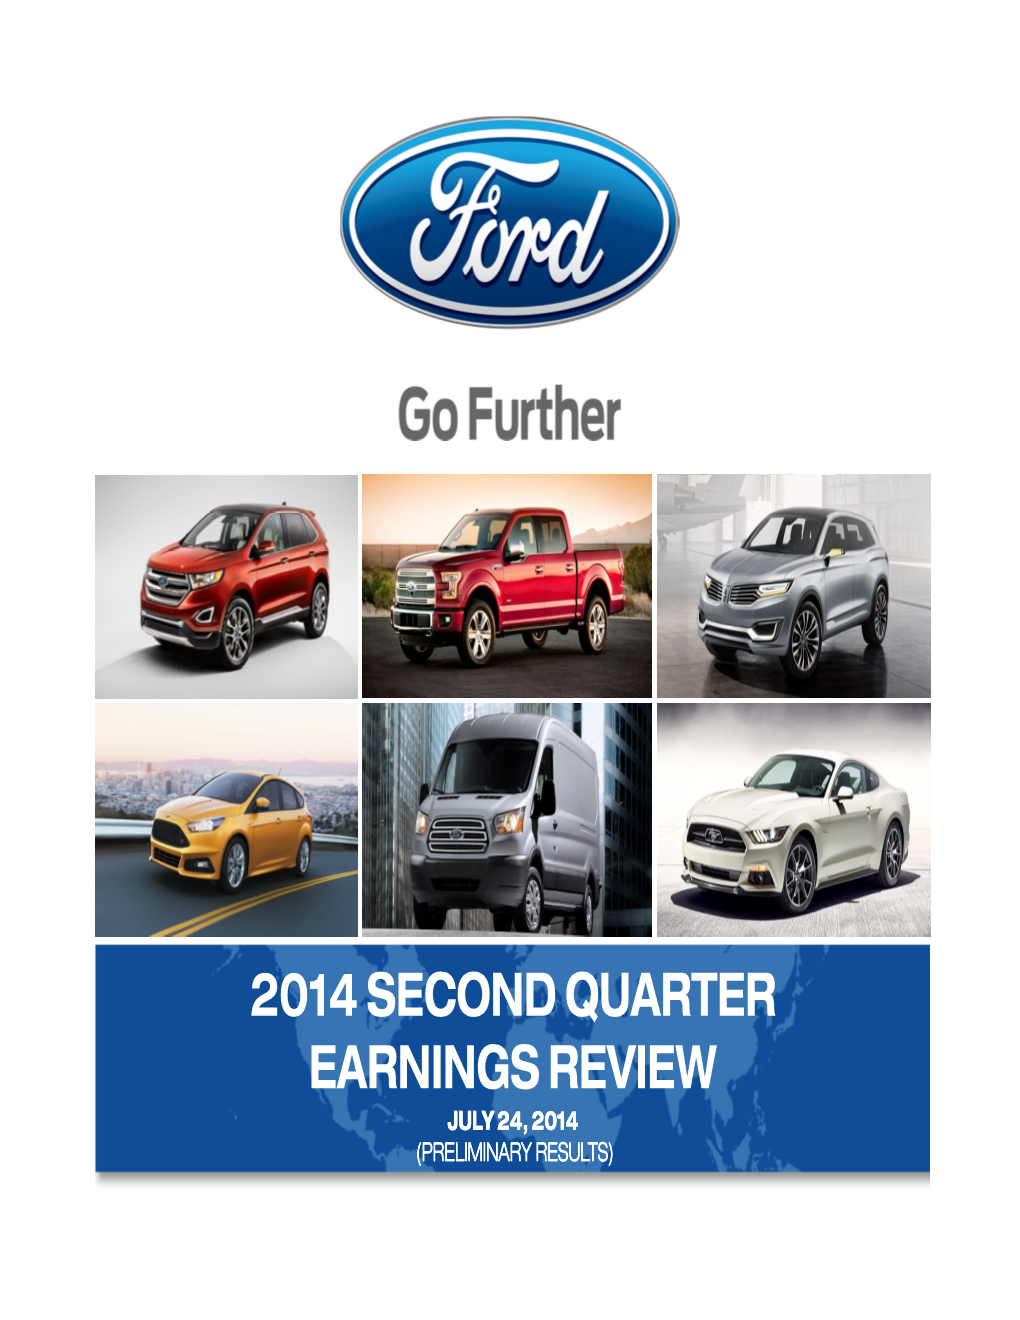 2014 Second Quarter Earnings Review July 24, 2014 (Preliminary Results)